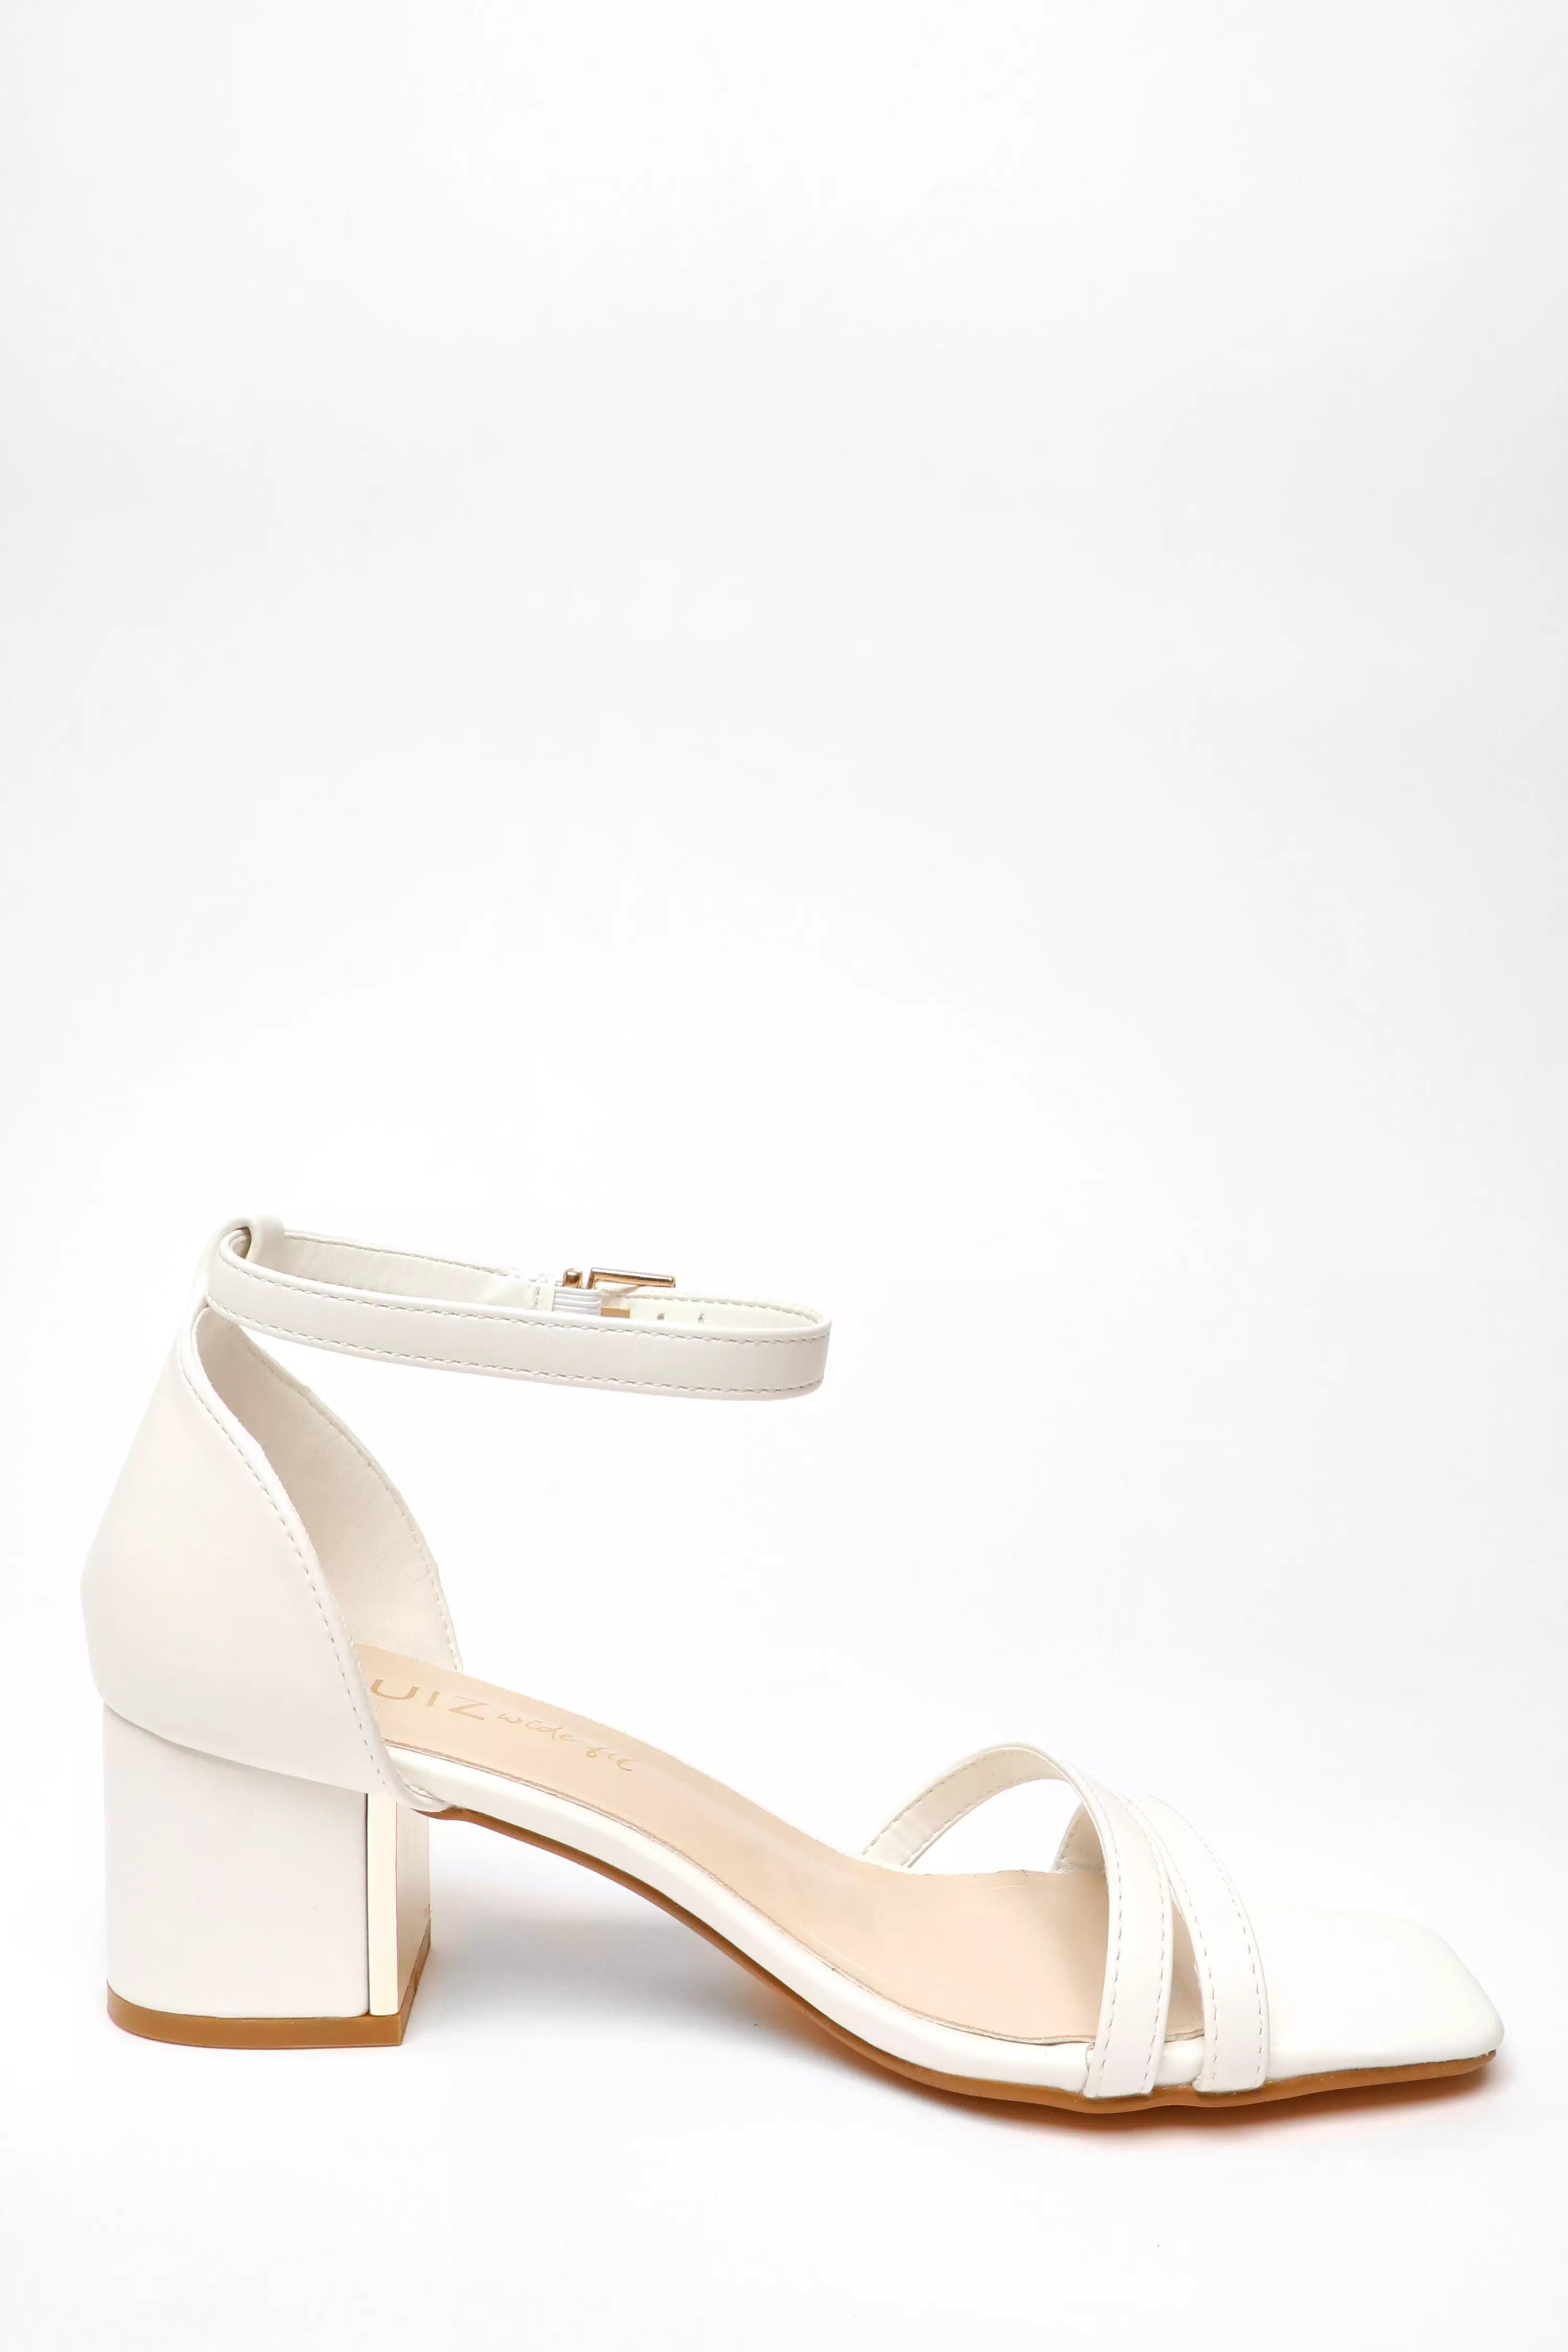 Wide Fit White Faux Leather Strappy Low Block Heeled Sandals